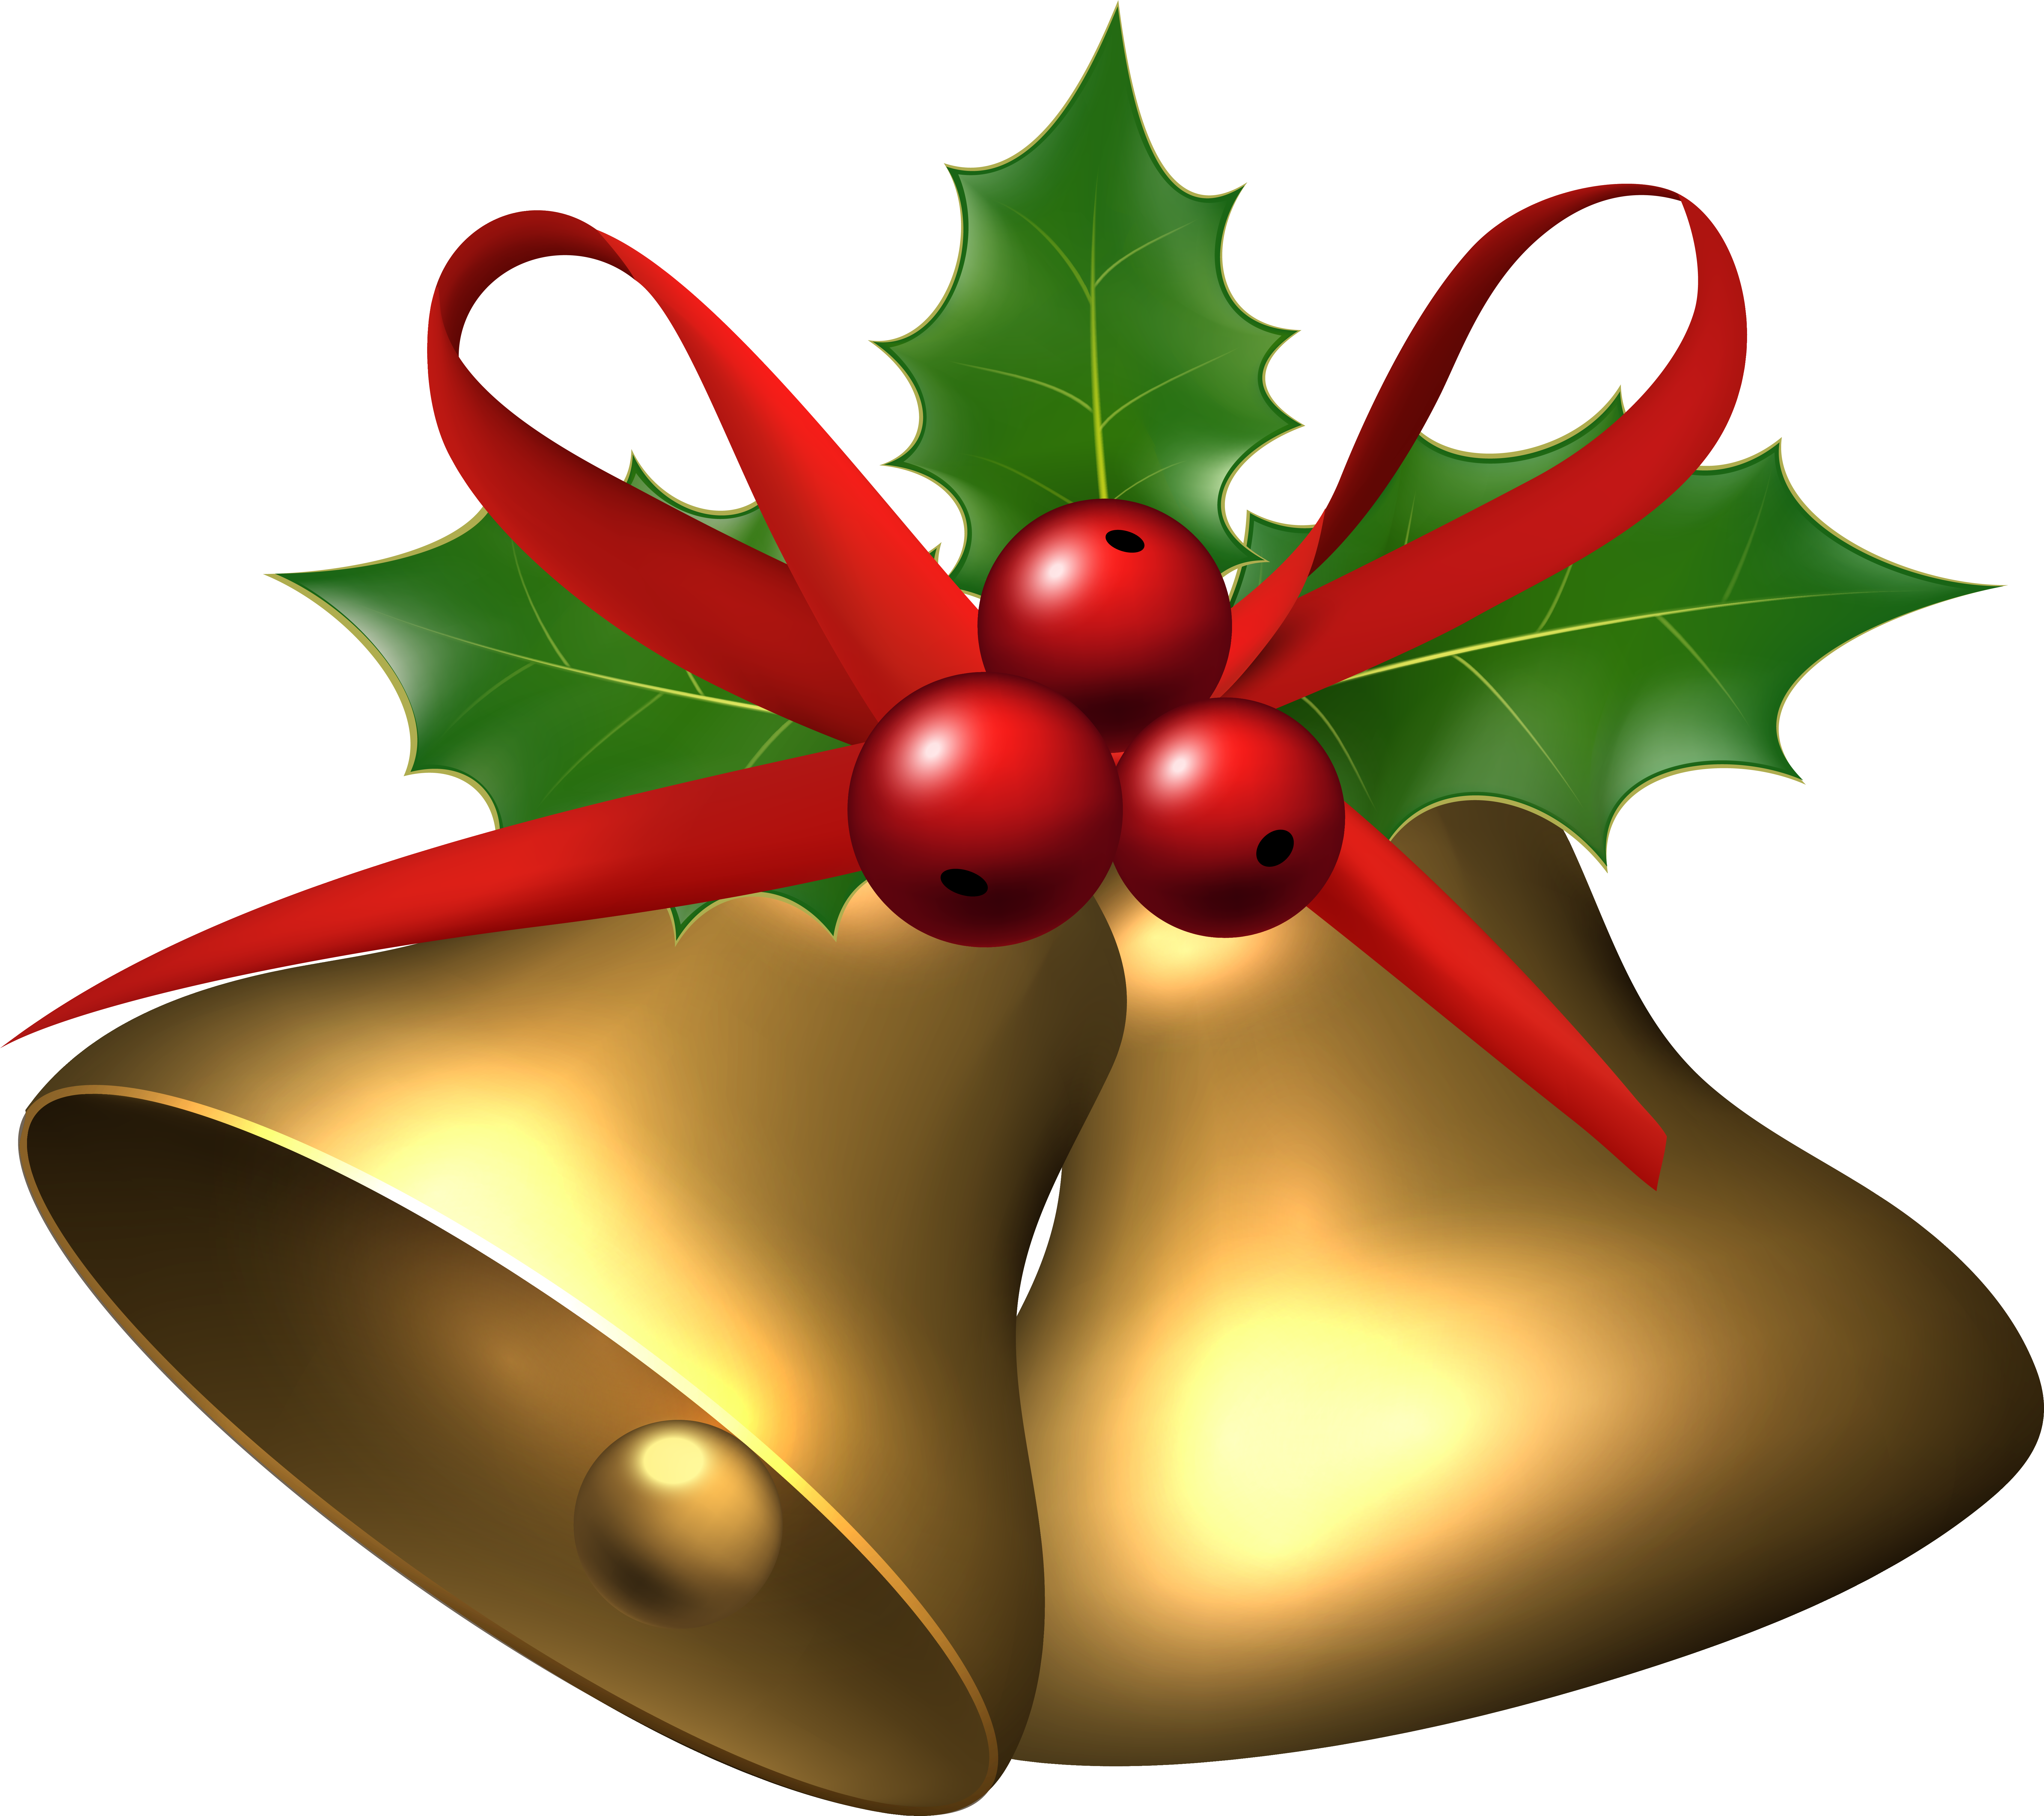 Large Christmas Bells With Holly - Large Christmas Bells With Holly (7620x6769)